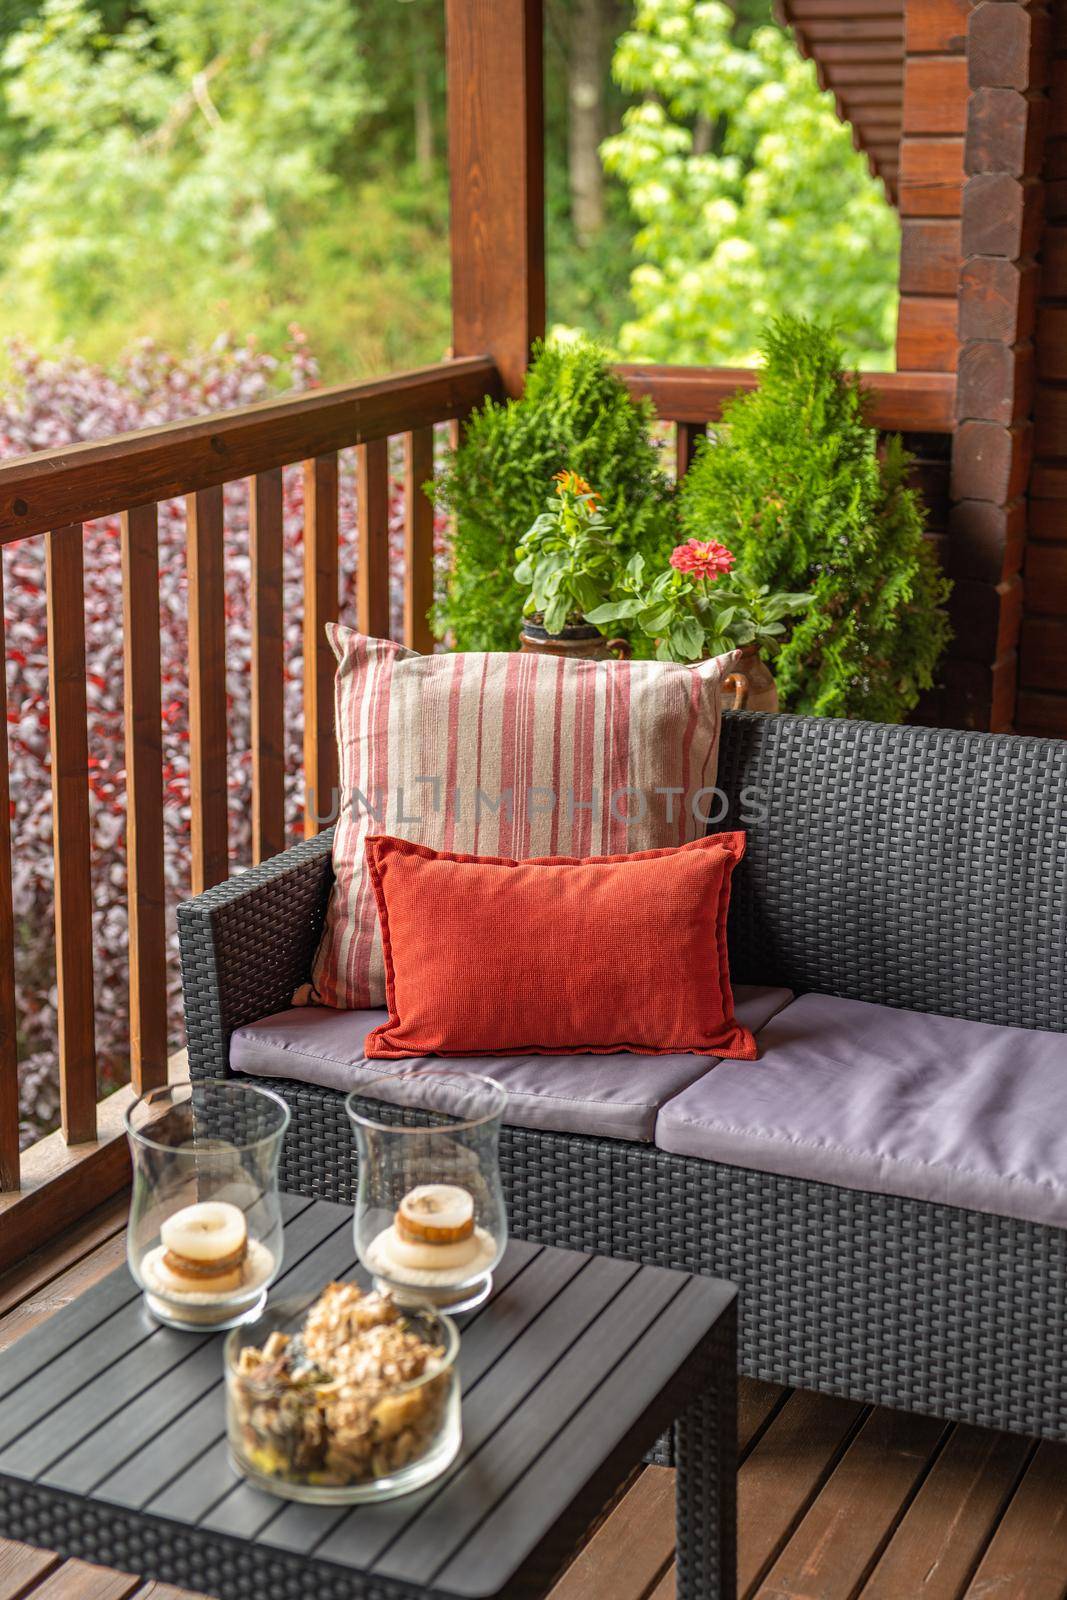 Cozy terrace with table and sofa at wooden cottage house surrounded by greenery and trees in countryside on cloudy summer day.